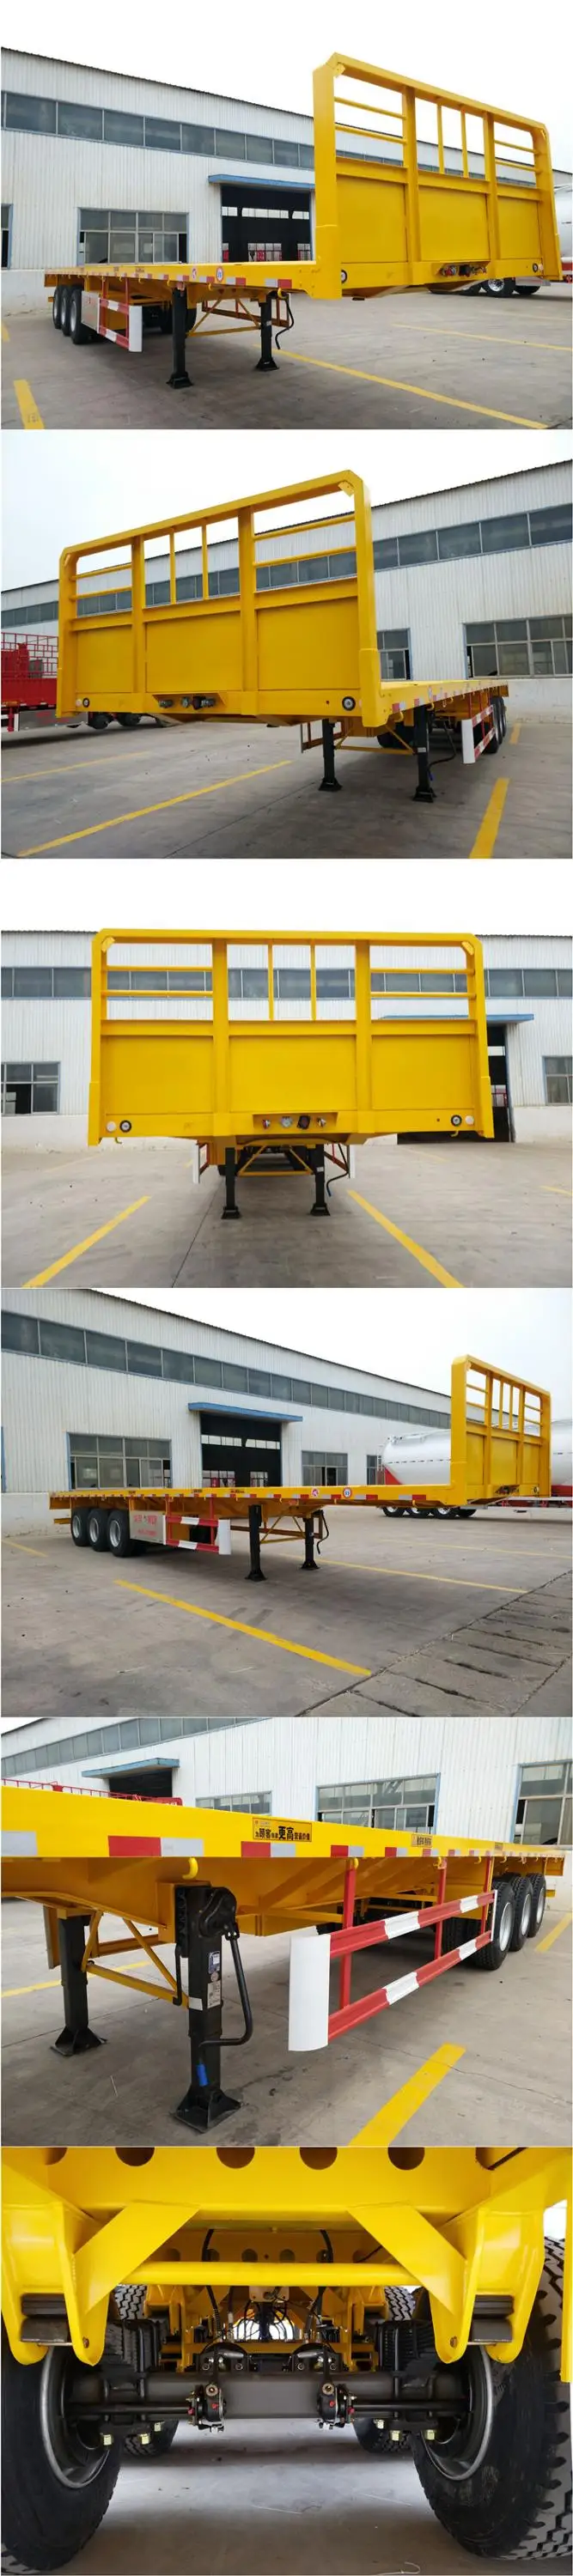 Huayu 3 Axle 40/50/60 Ton 40FT Truck High Bed Flatbed Container Semi Trailer